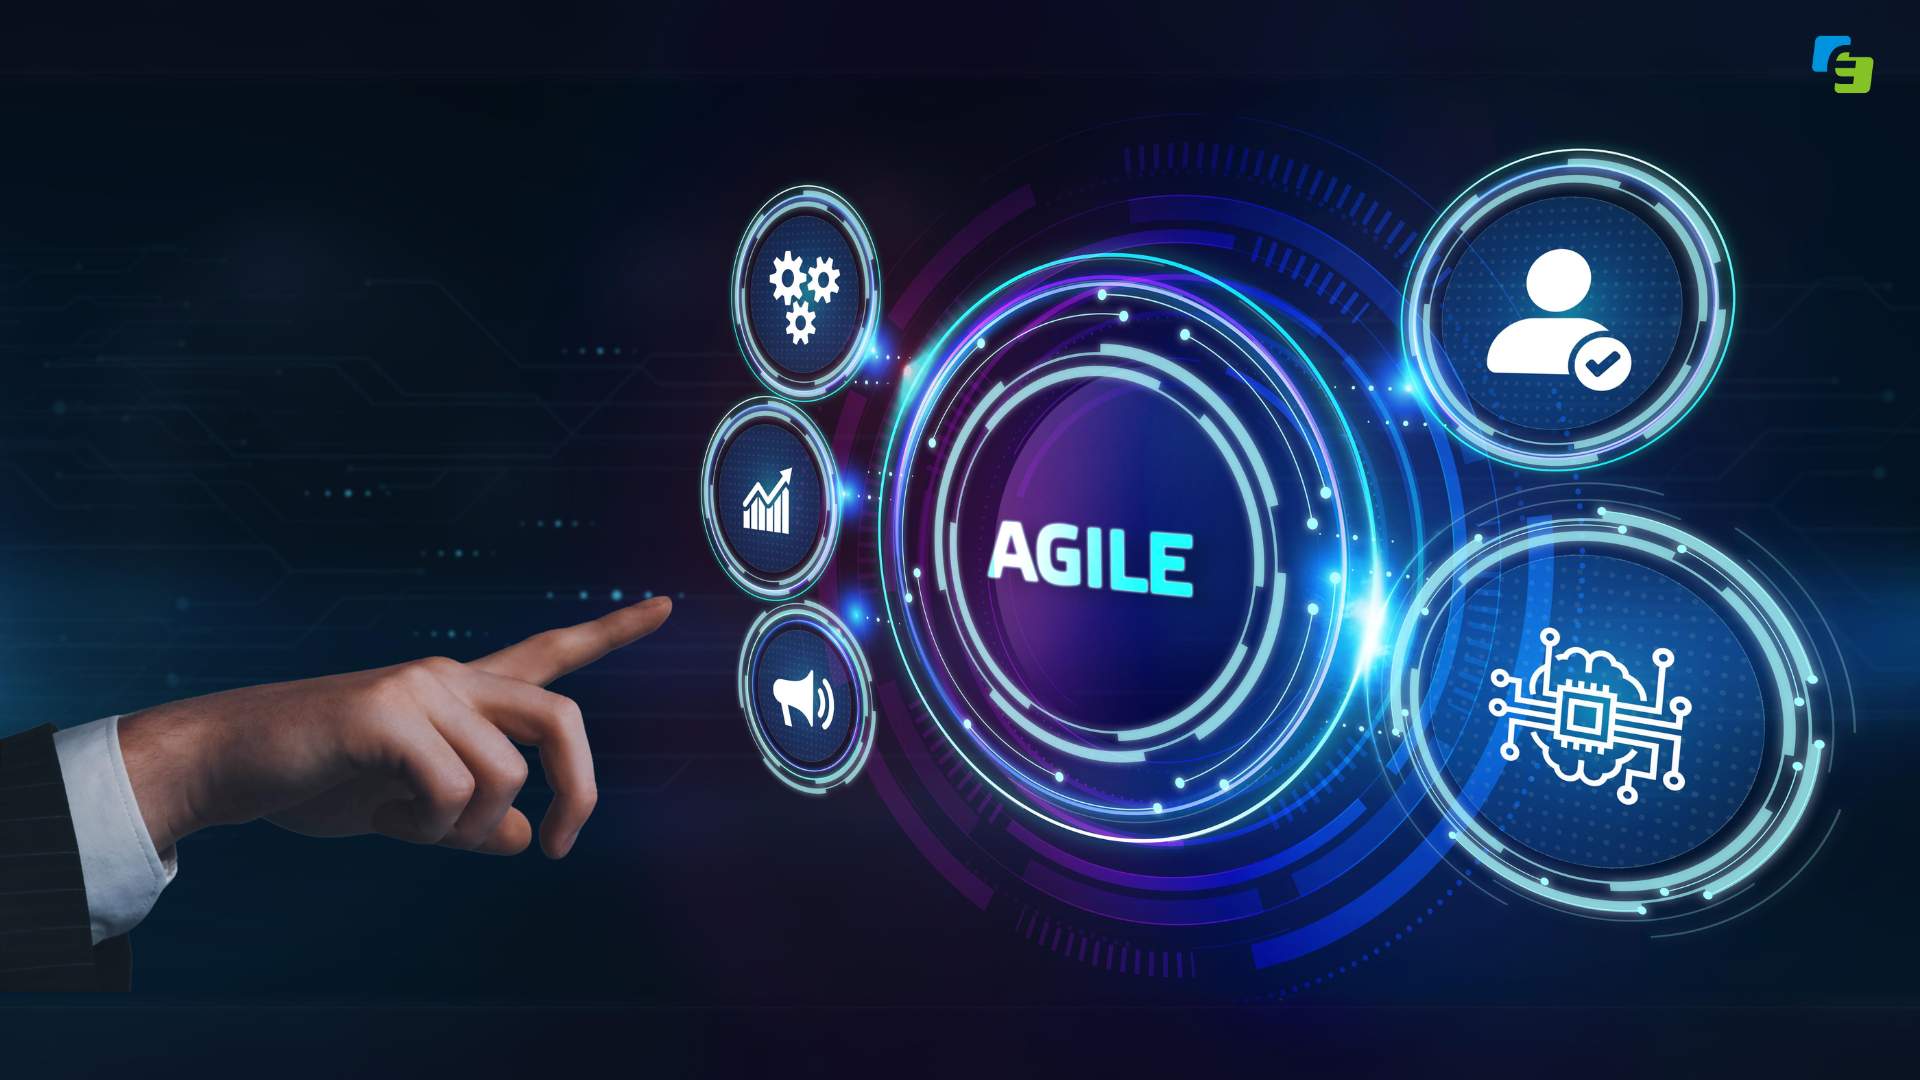 Image showing Agile Software Development as an option